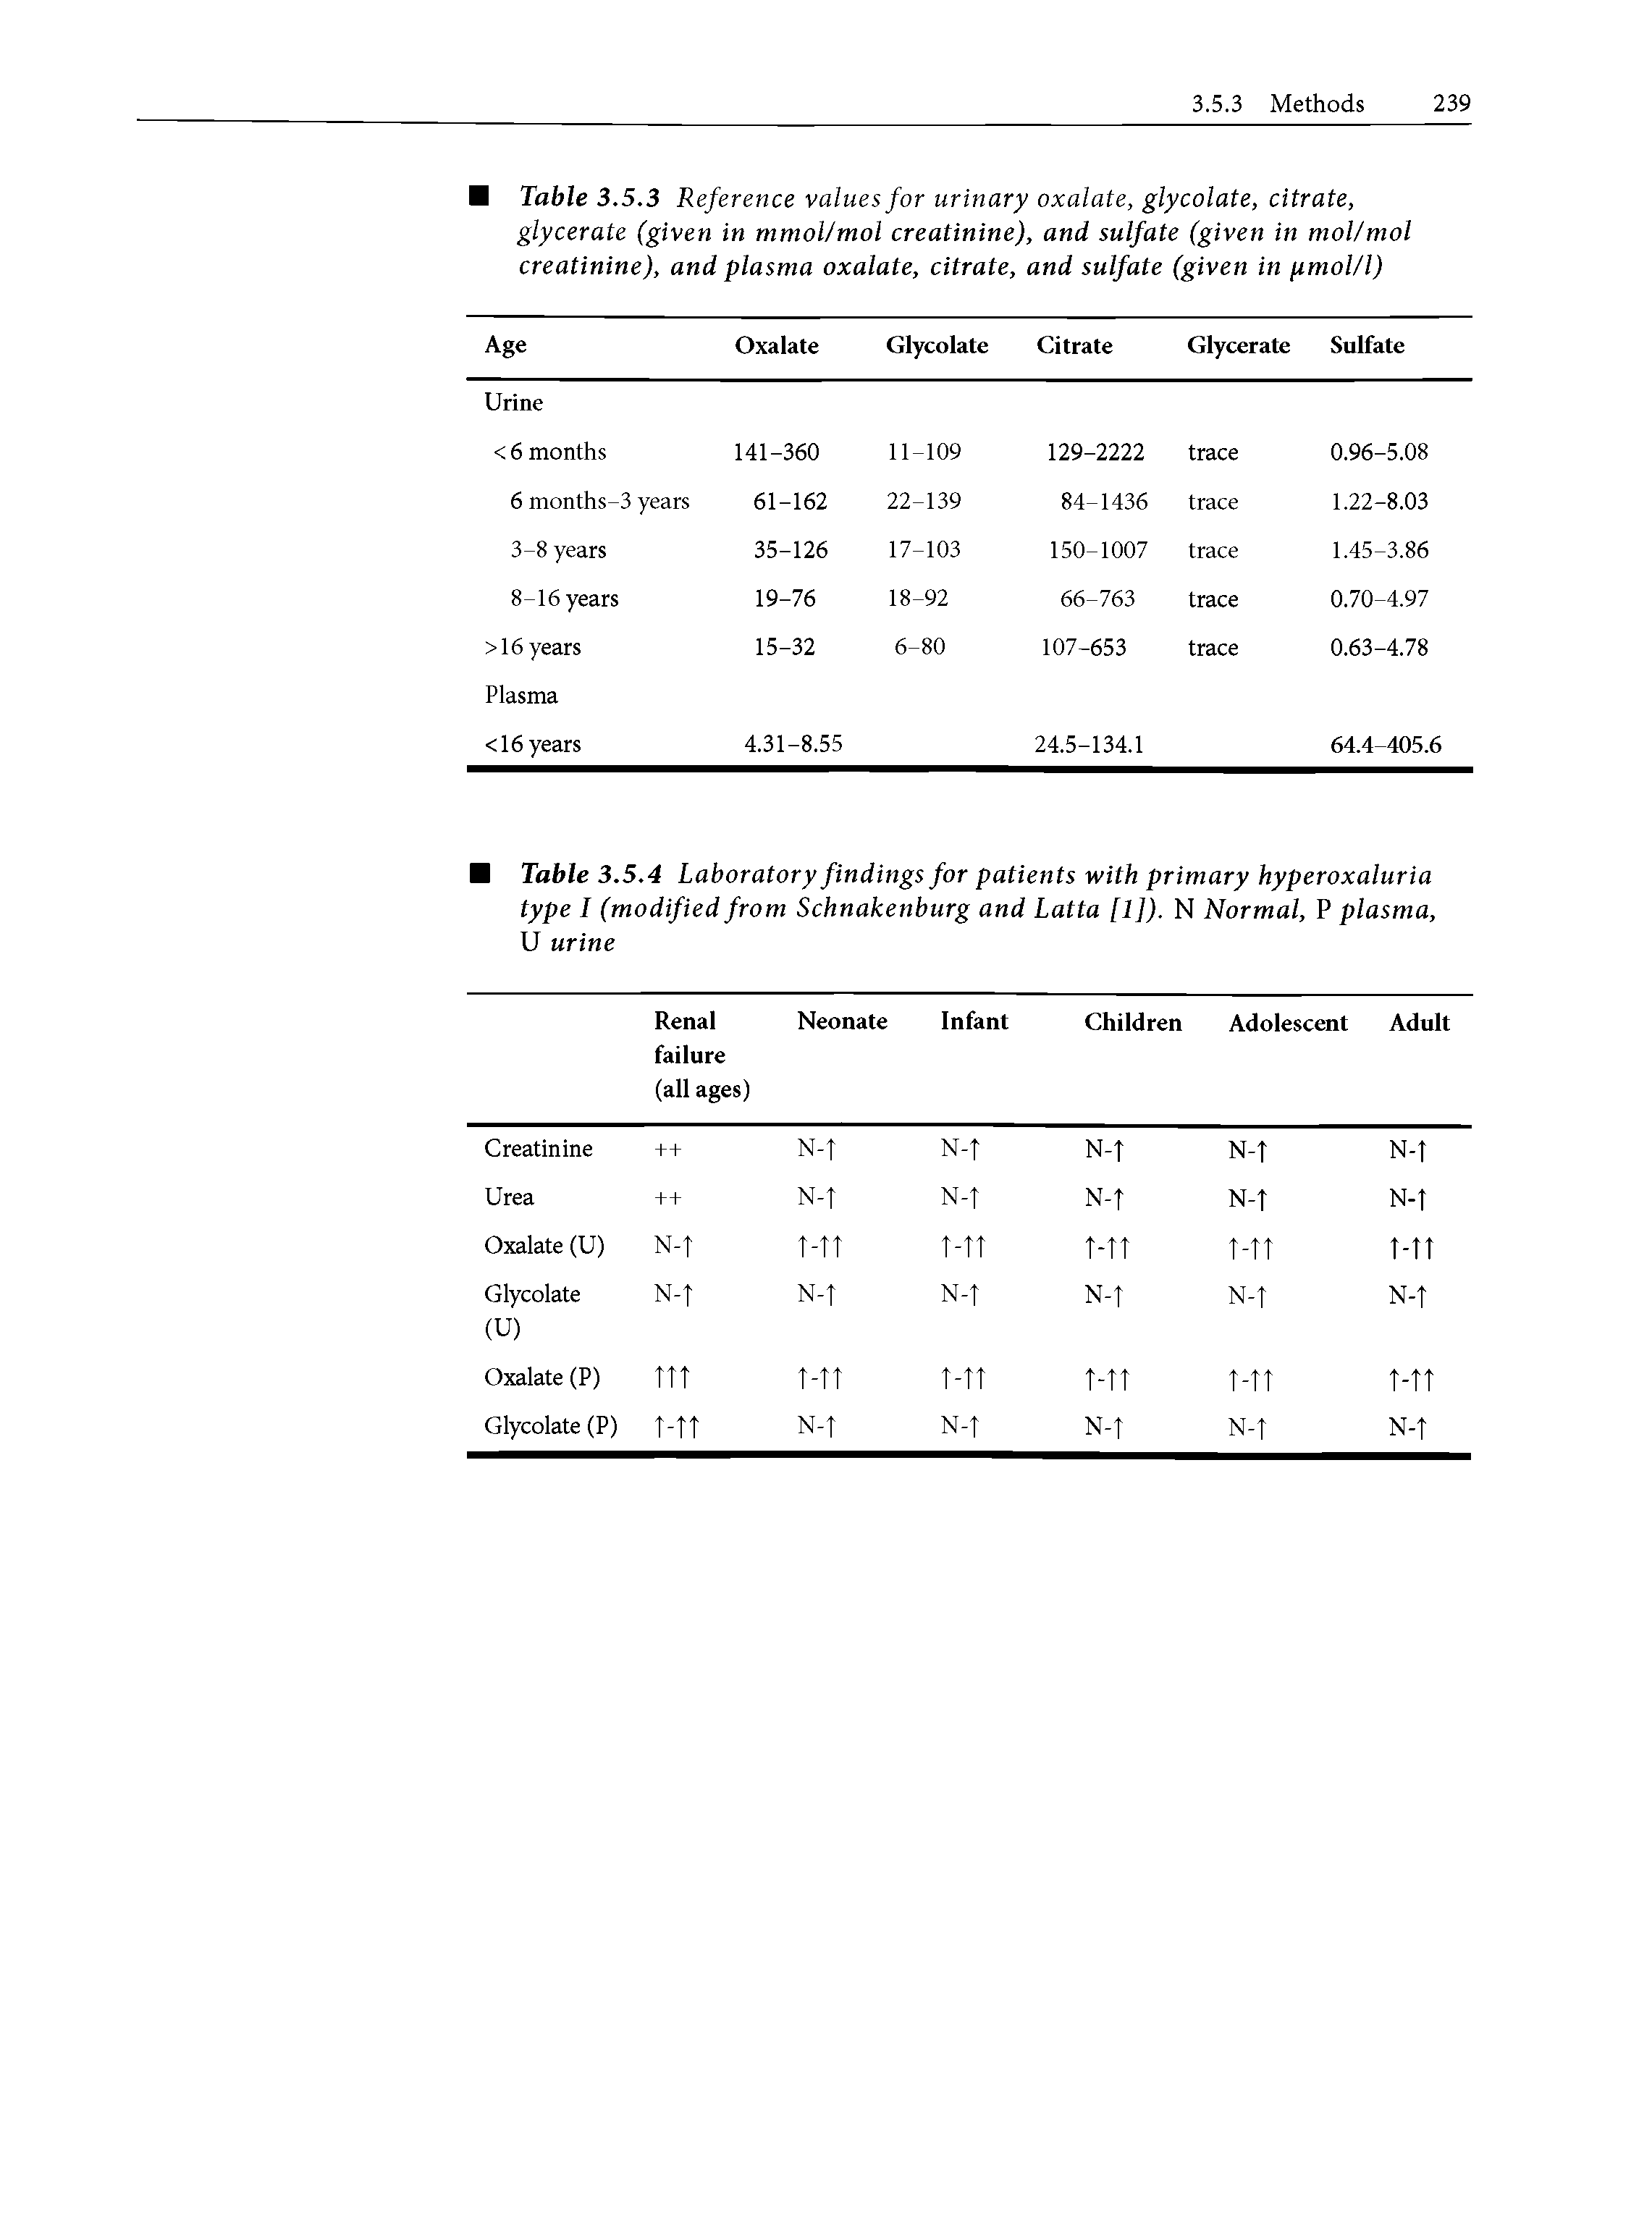 Table 3.5.3 Reference values for urinary oxalate, glycolate, citrate, glycerate (given in mmol/mol creatinine), and sulfate (given in mol/mol creatinine), and plasma oxalate, citrate, and sulfate (given in fimol/l)...